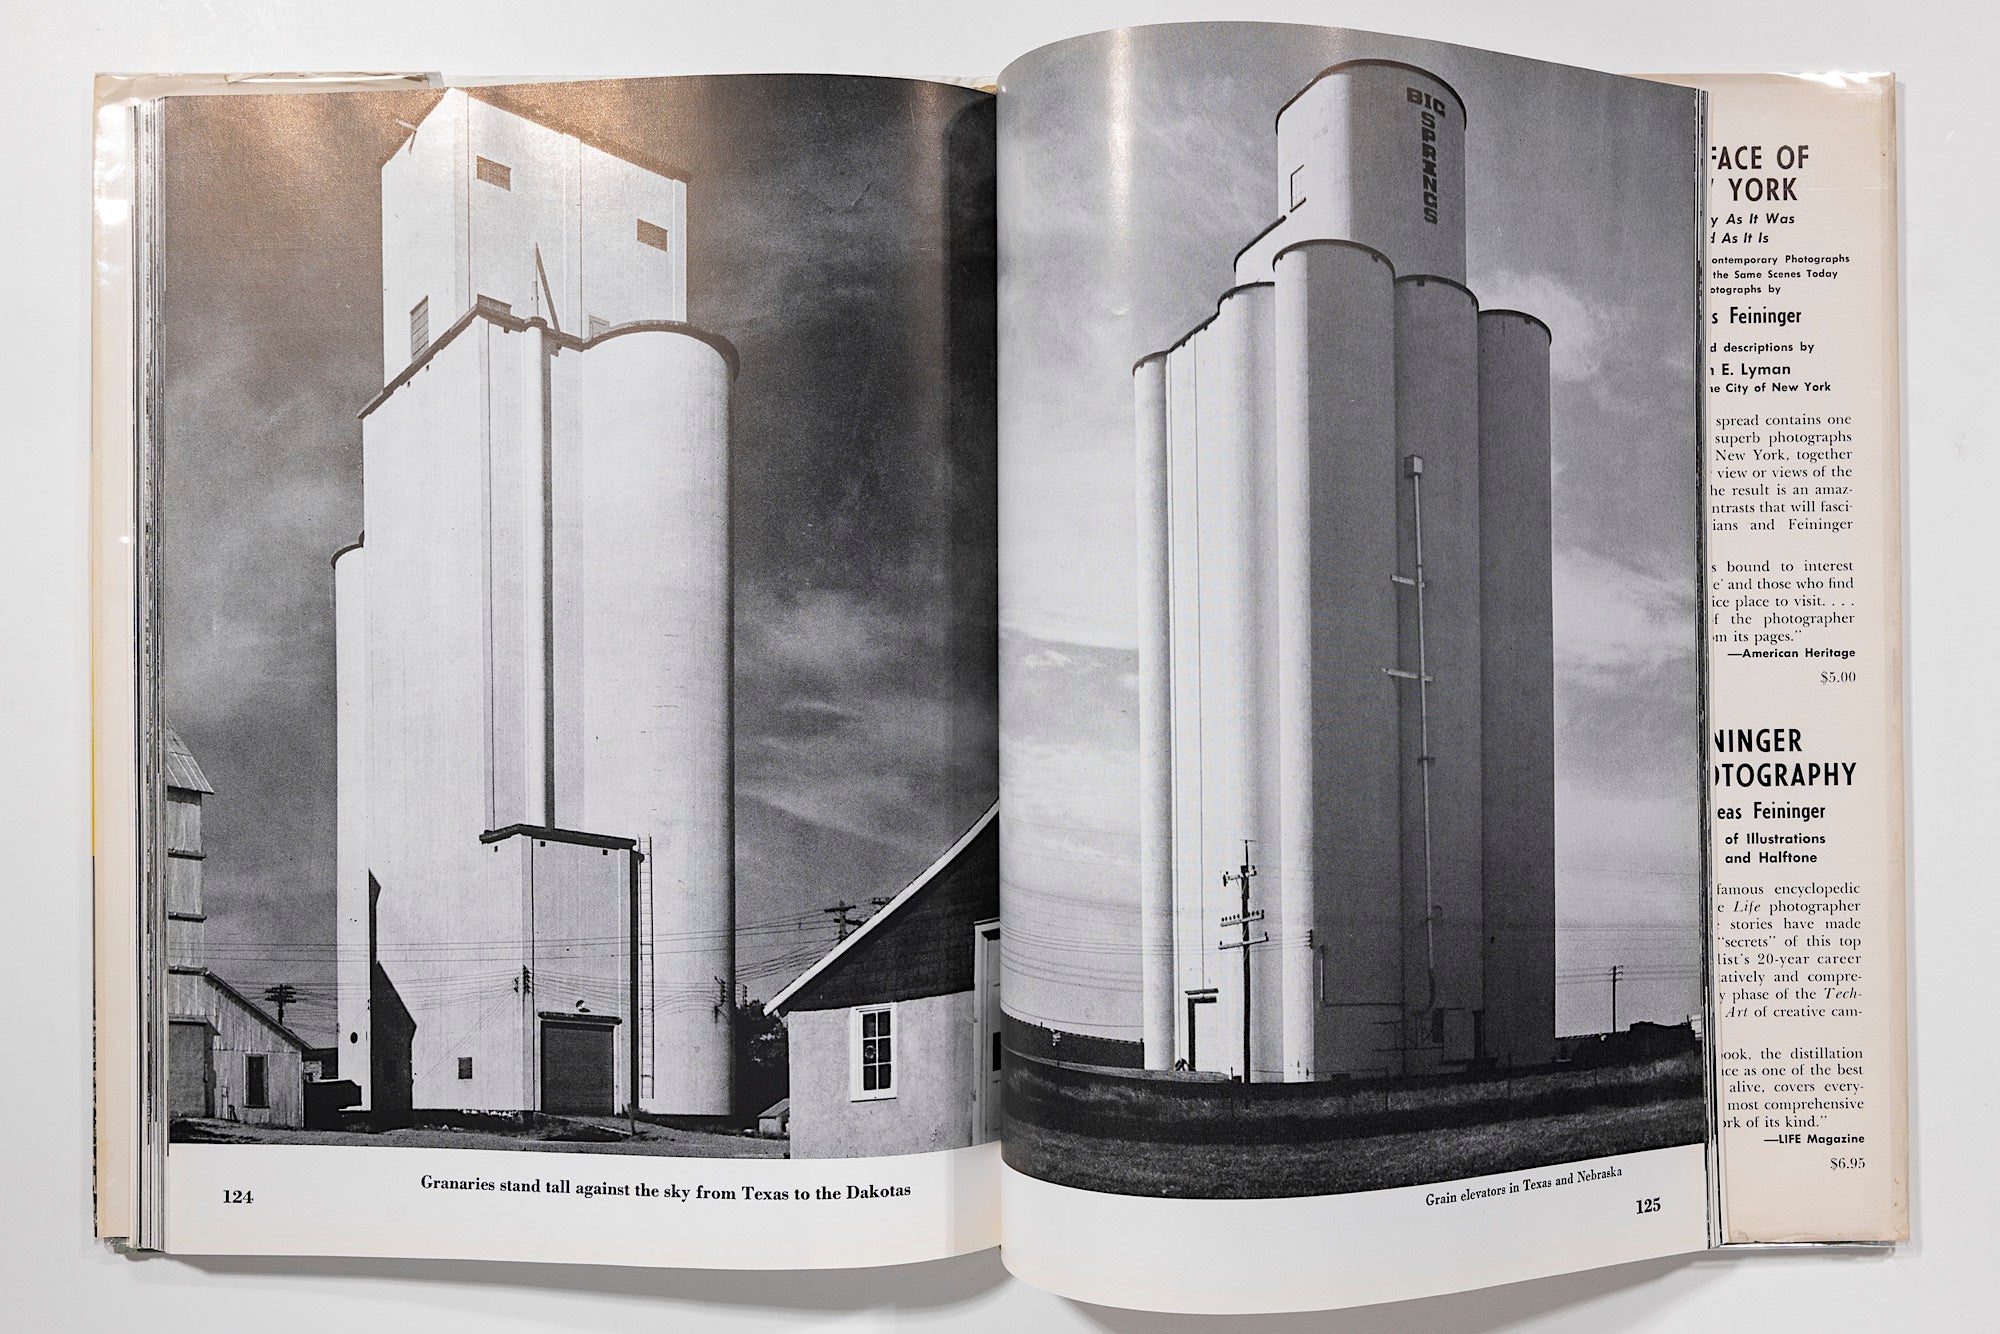 Andreas Feininger - Changing America: The Land As It Was and How Man Has Changed It